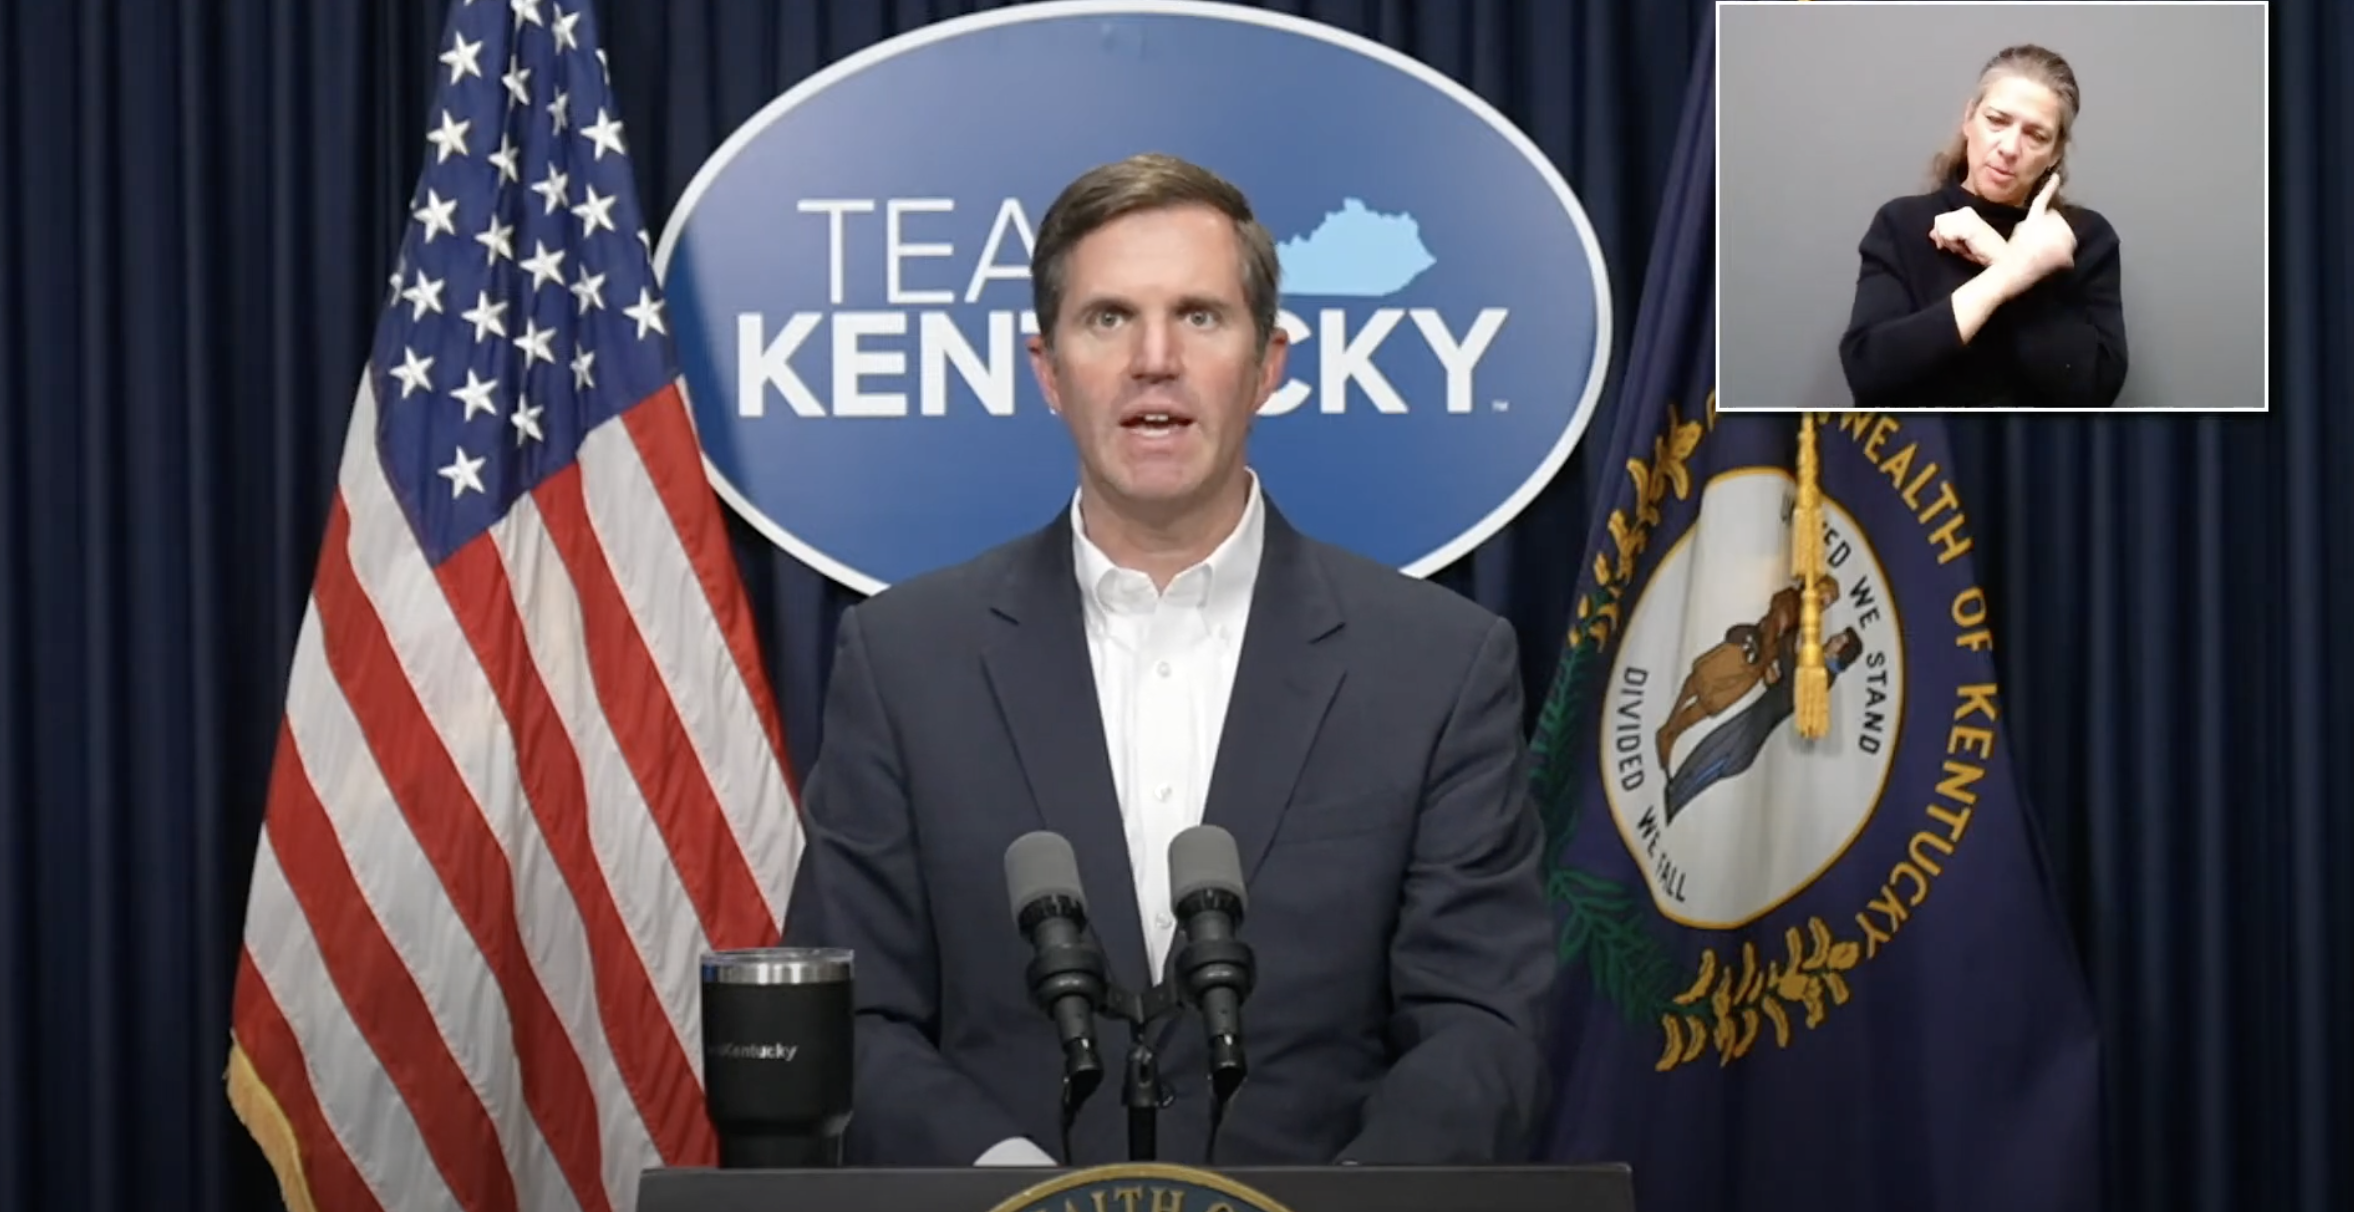 Lexington to receive state grant to support mental health crisis response, Beshear announces